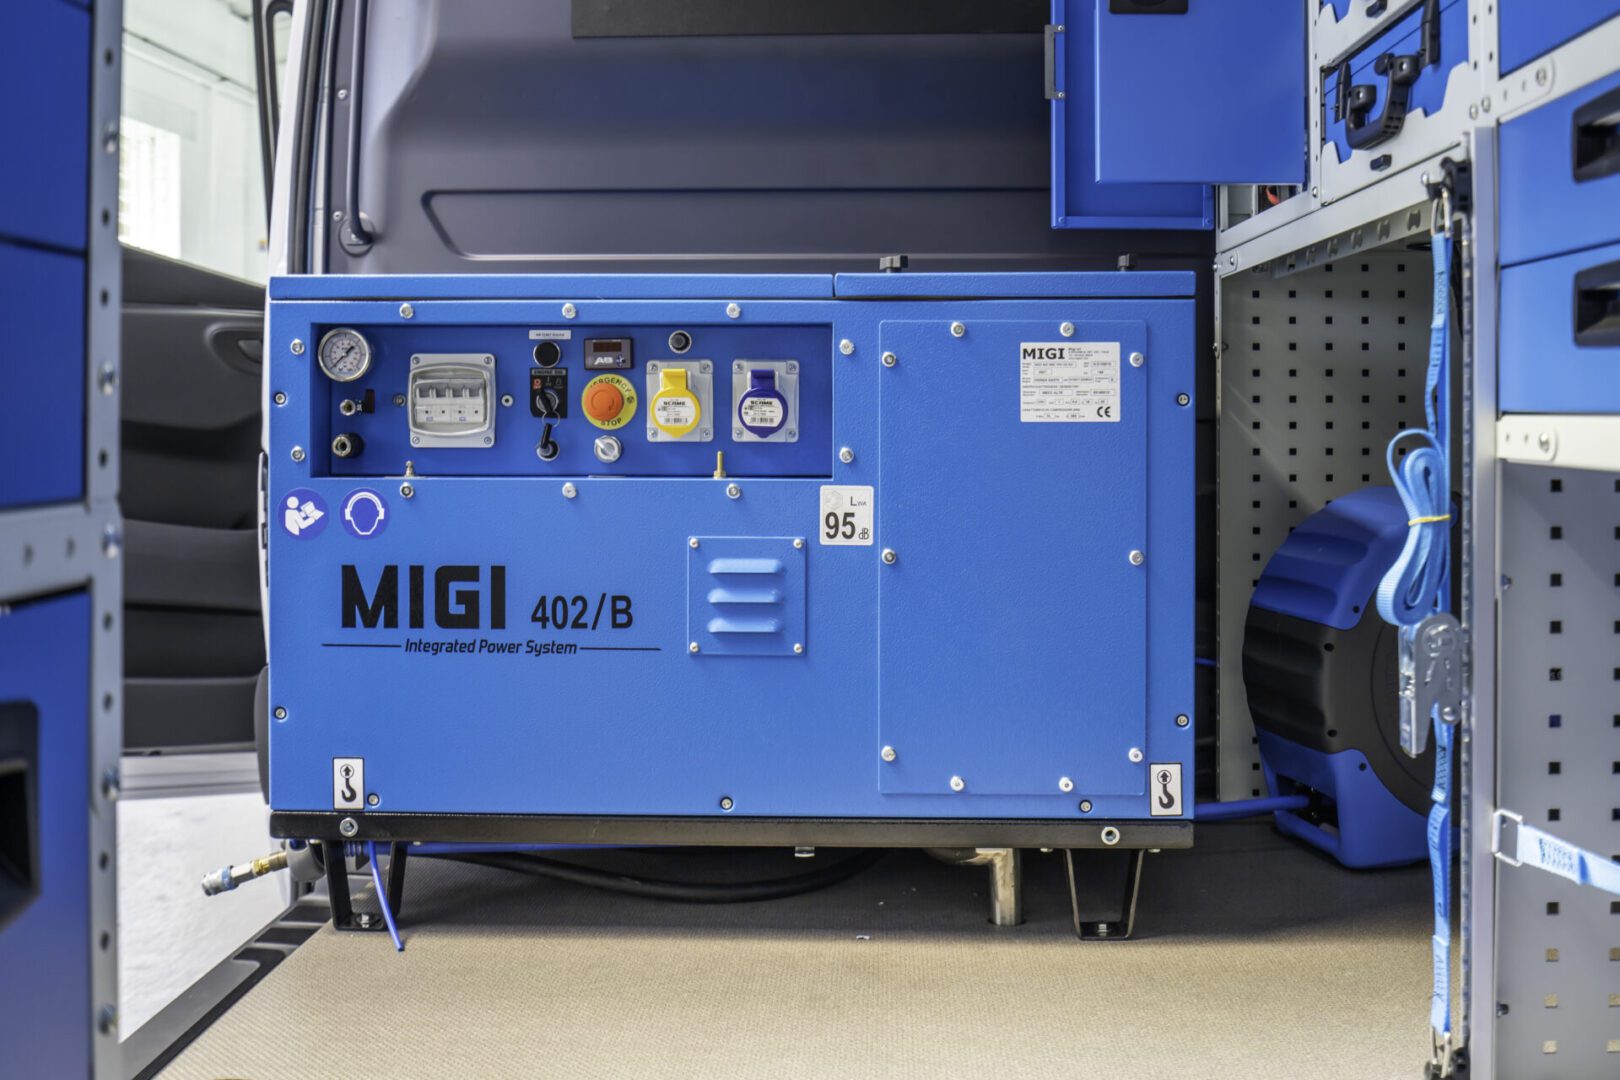 migi compressor generator for RS recovery by van racking solutions